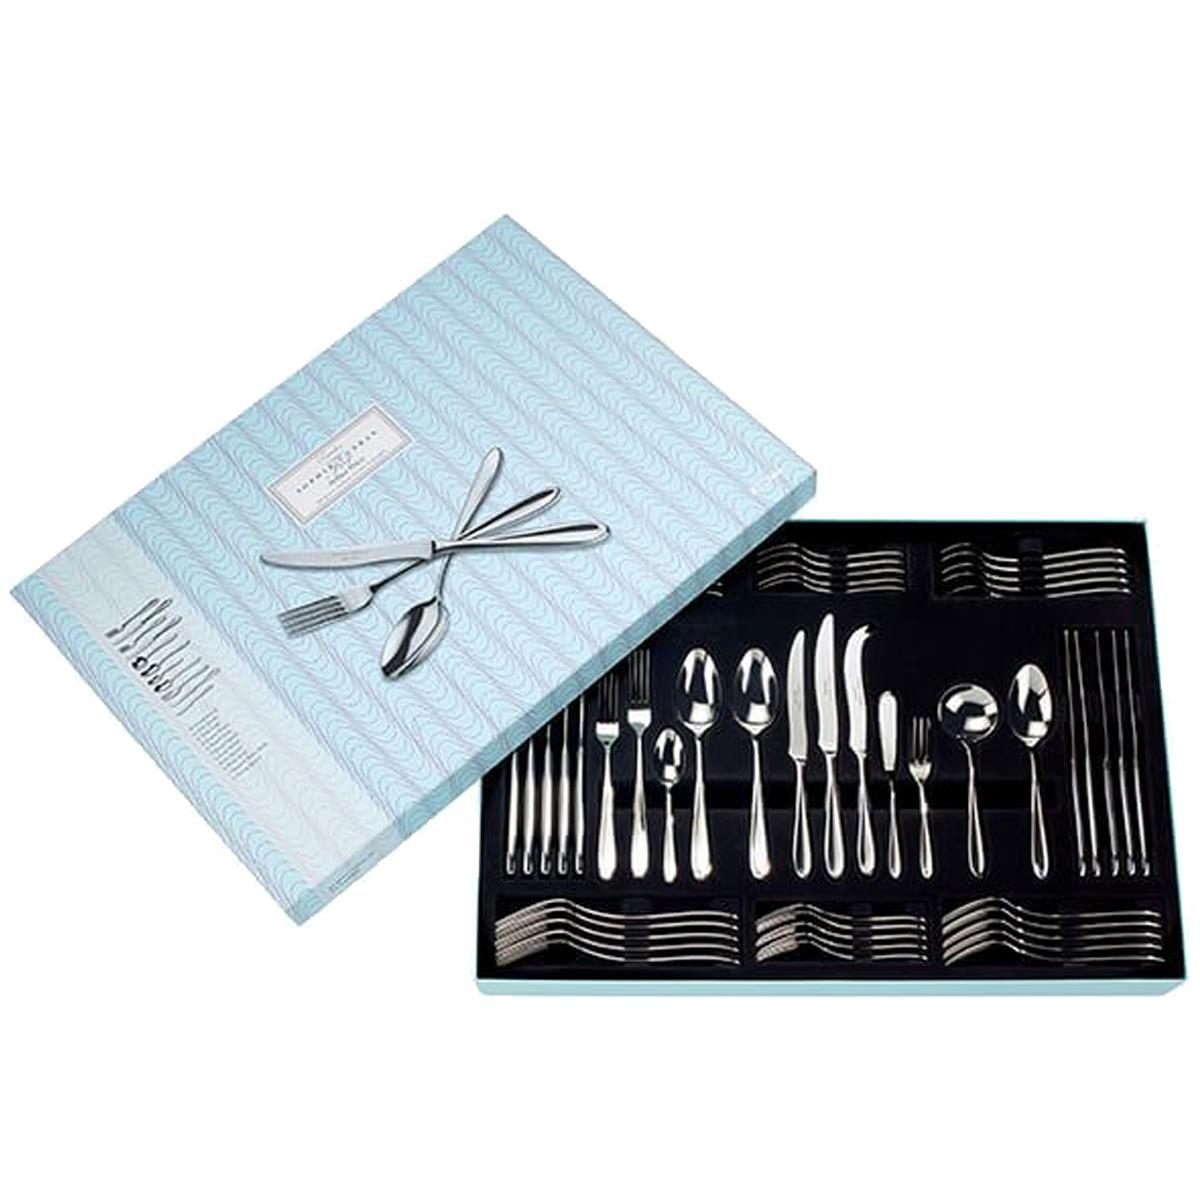 Where is the Arthur Price Sophie Conran Rivelin 52 Piece Cutlery Set manufactured?